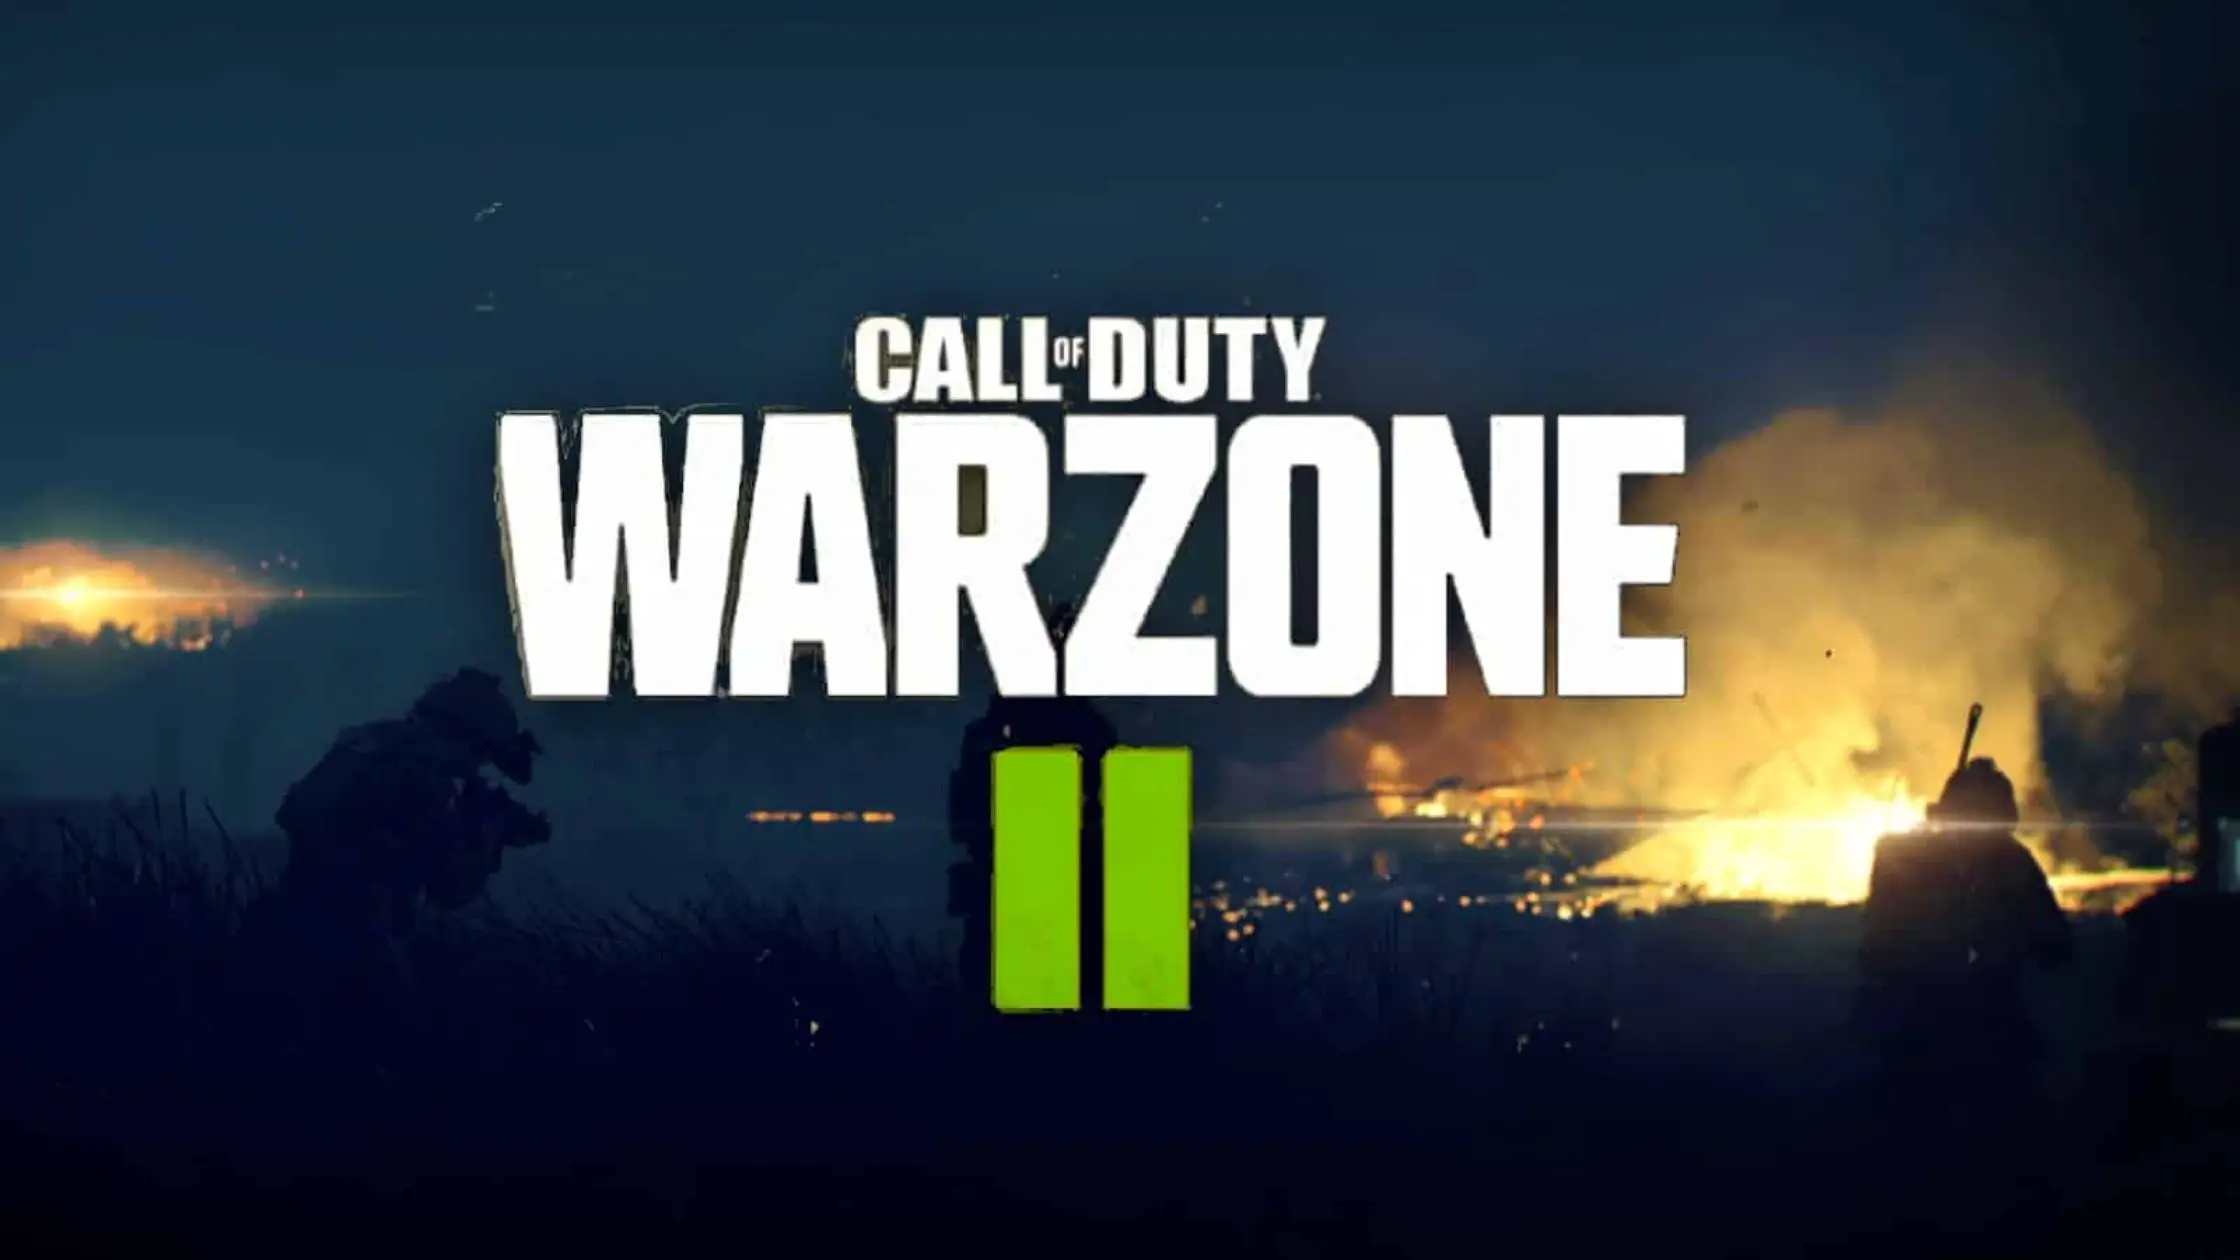 warzone-features-coming-in-warzone-2-what-are-those-features